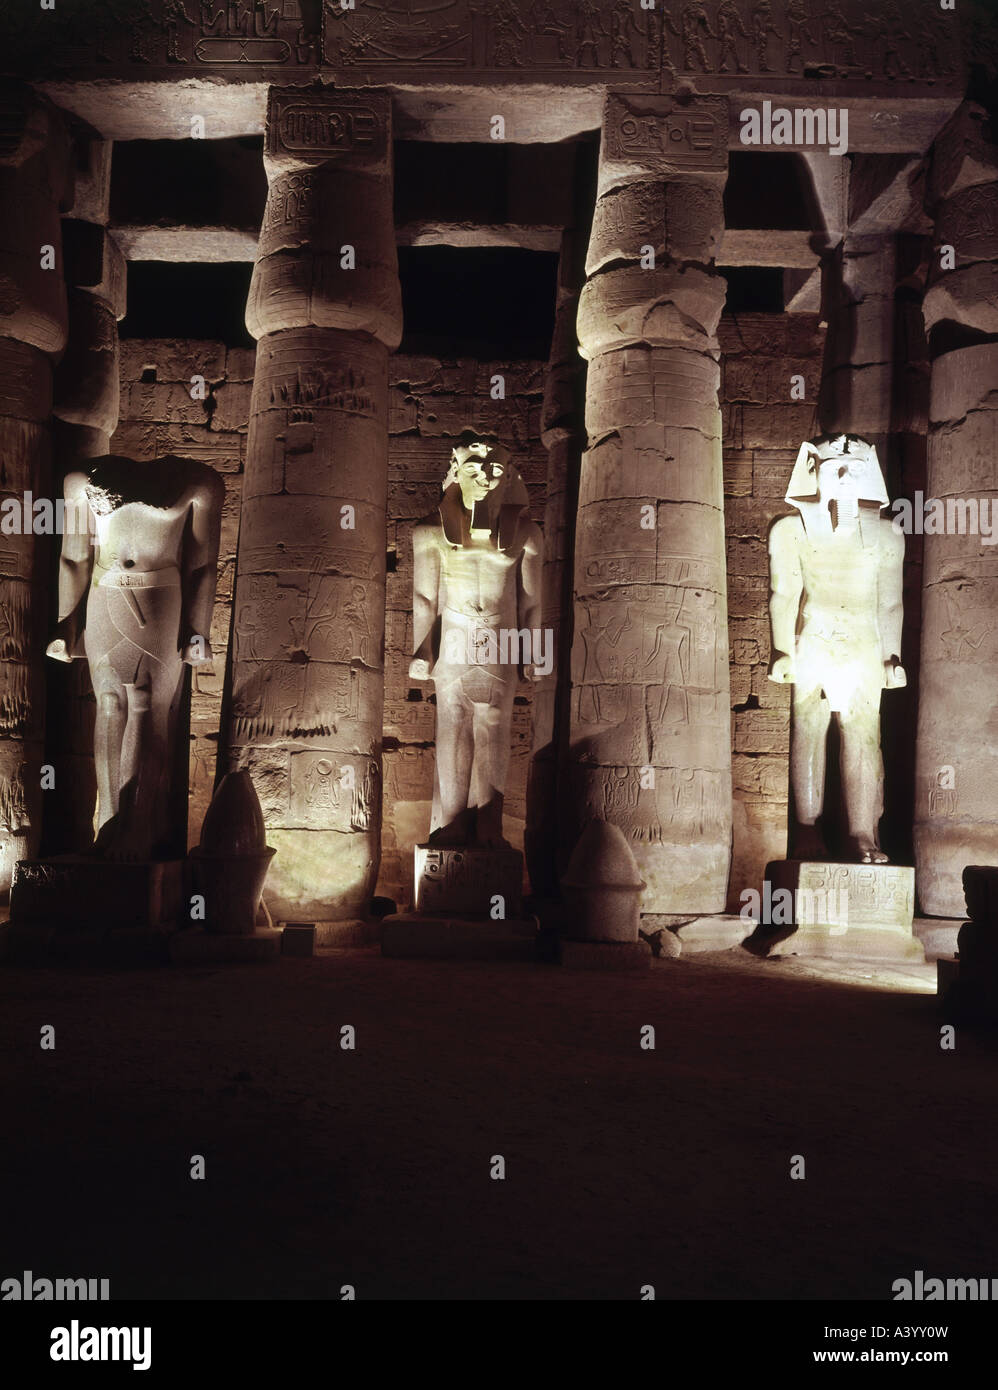 travel /geography, Egypt, Luxor, buildings, temple, Theban divine family Amun, Mut, Chons, exterior view, night, temple of Ramesses II, southern part, statues of pharaoh Amenhotep III, architect Amenhotep son of Hapu, 1402 - 1364 B.C., extensions under Ramesses II, 1303 - 1236 B.C., historic, historical, Africa, architecture, temples, ancient world, New Kingdom, 18th / 19th dynasty, 15th - 13th century B.C., column, columns, statue, sculpture, sculptures, ancient world, Stock Photo